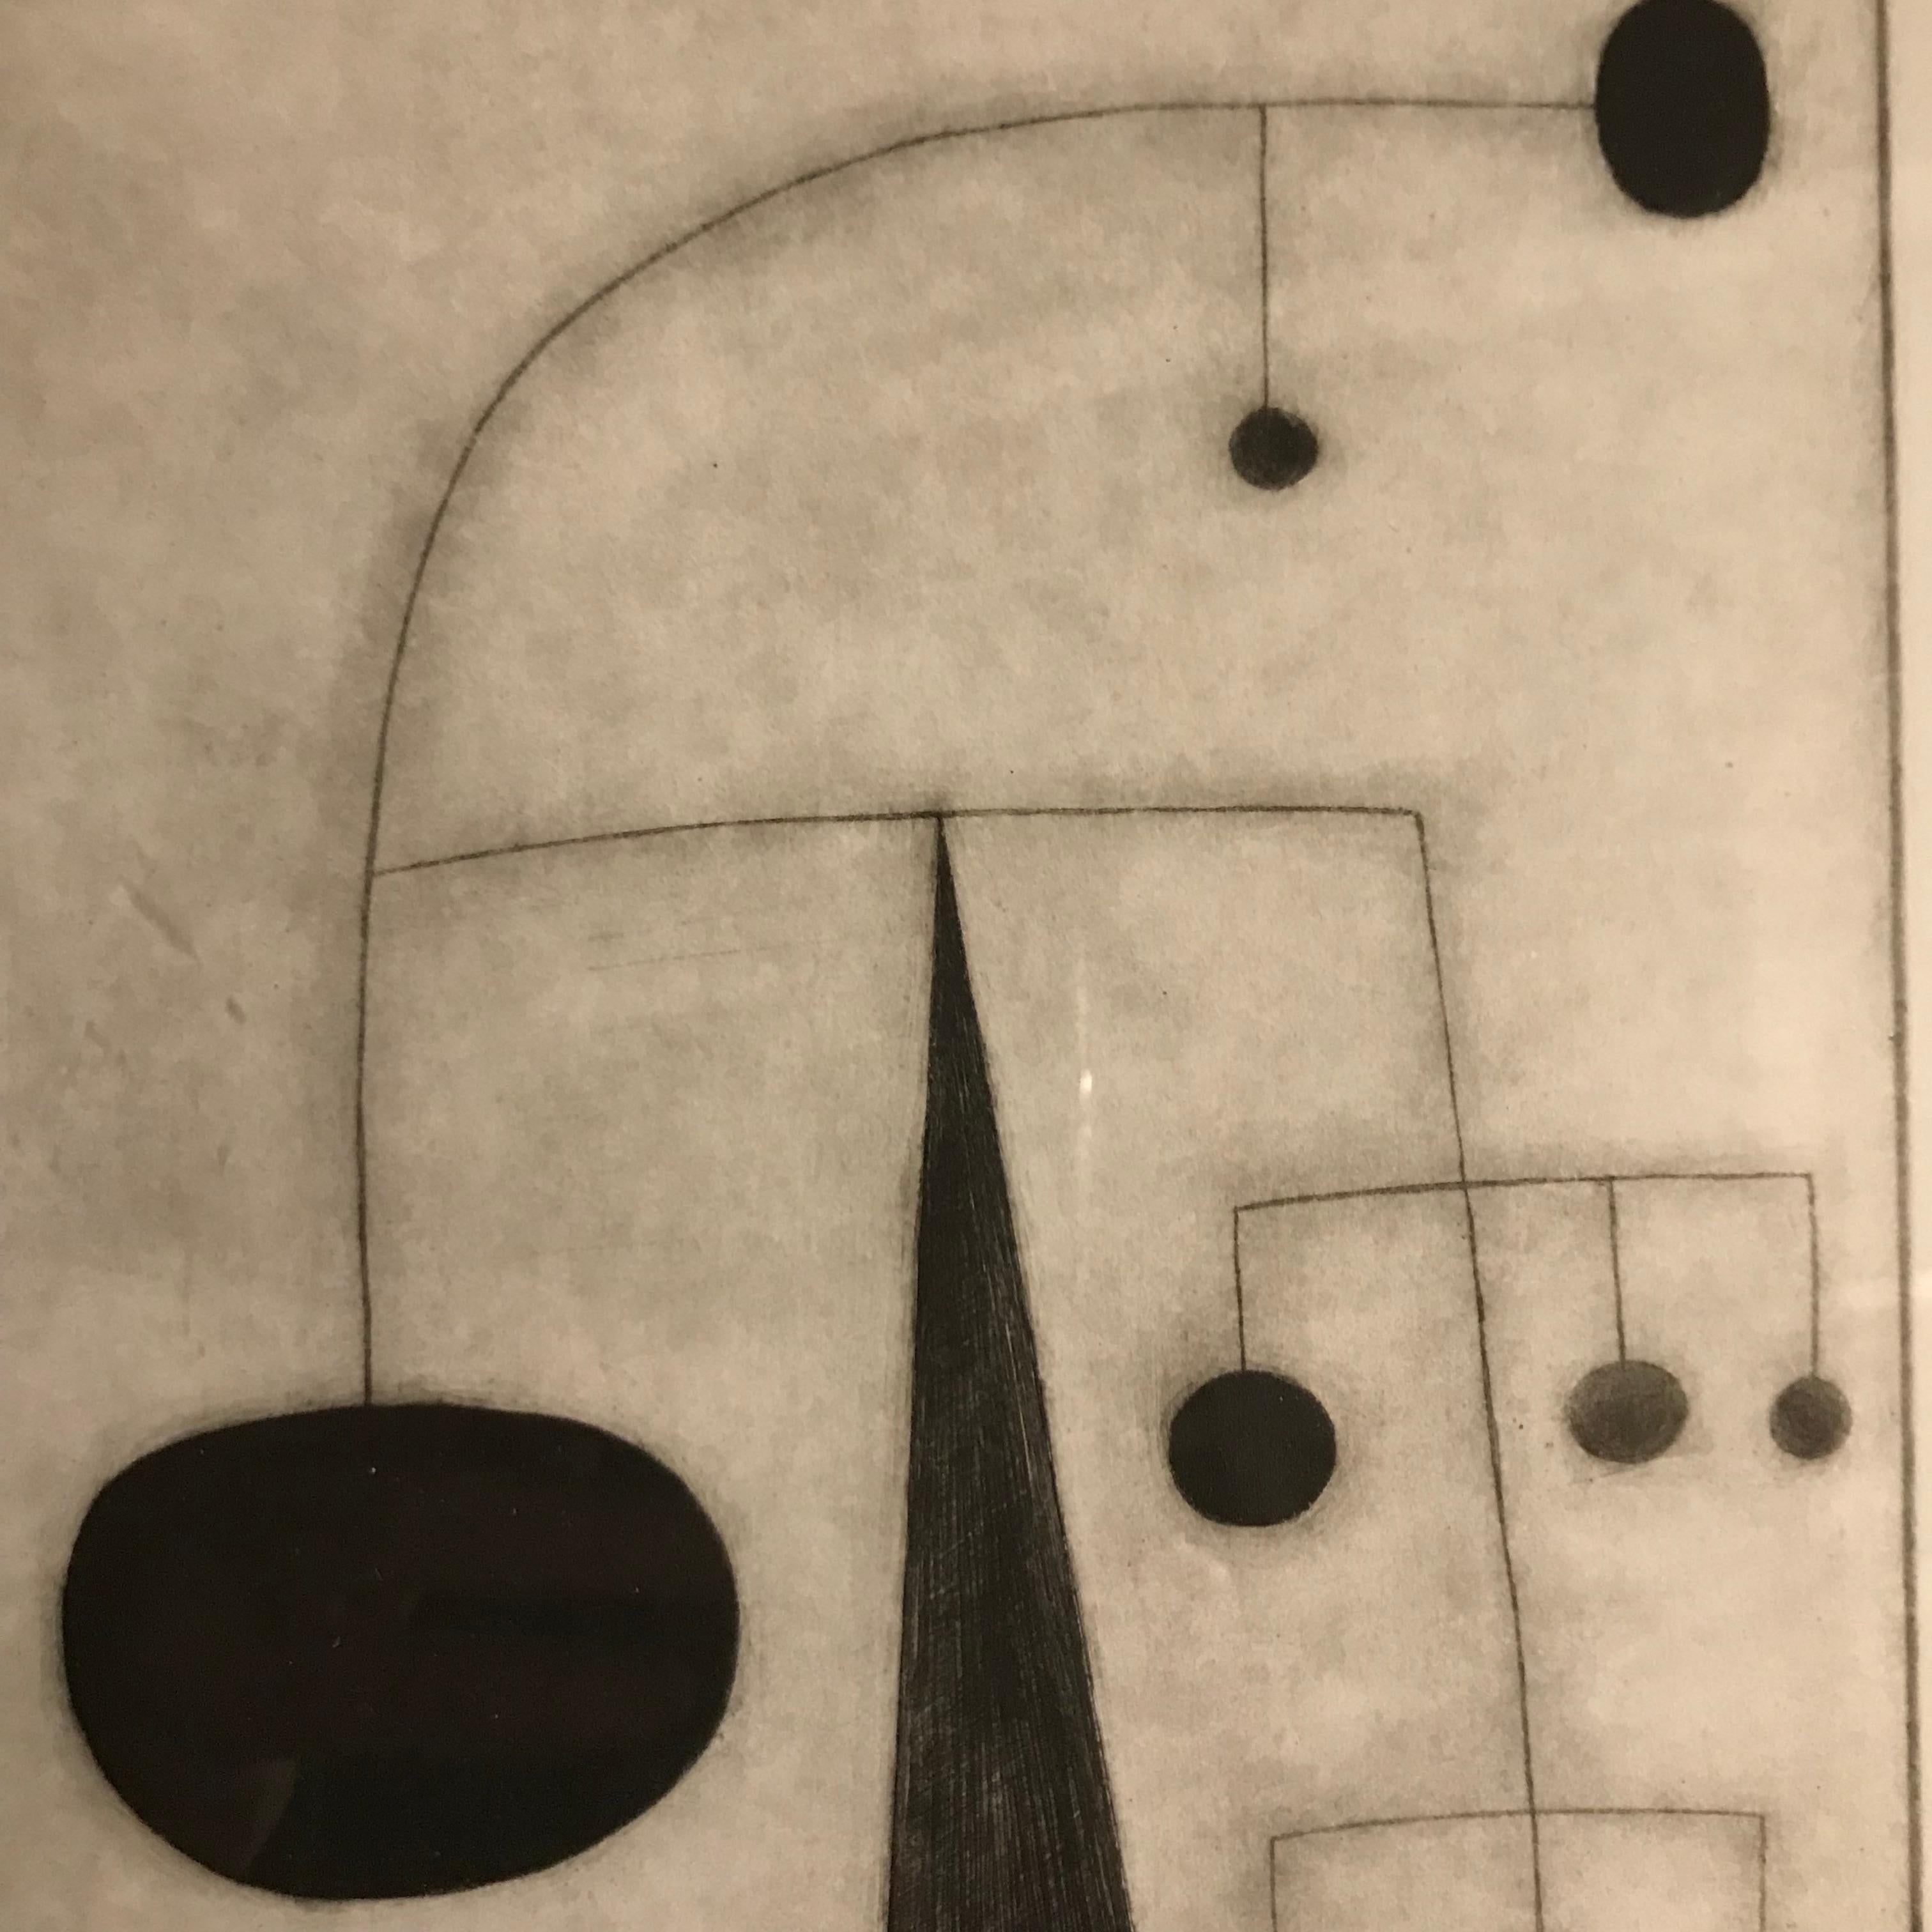 Contemporary abstract black and white etching by English artist Oliver Gaiger.
Matted and framed in a black and gold wood frame.
Part of a collection of black and white etchings by the artist.
Oliver Gaiger was born in 1972 in Uganda and lives